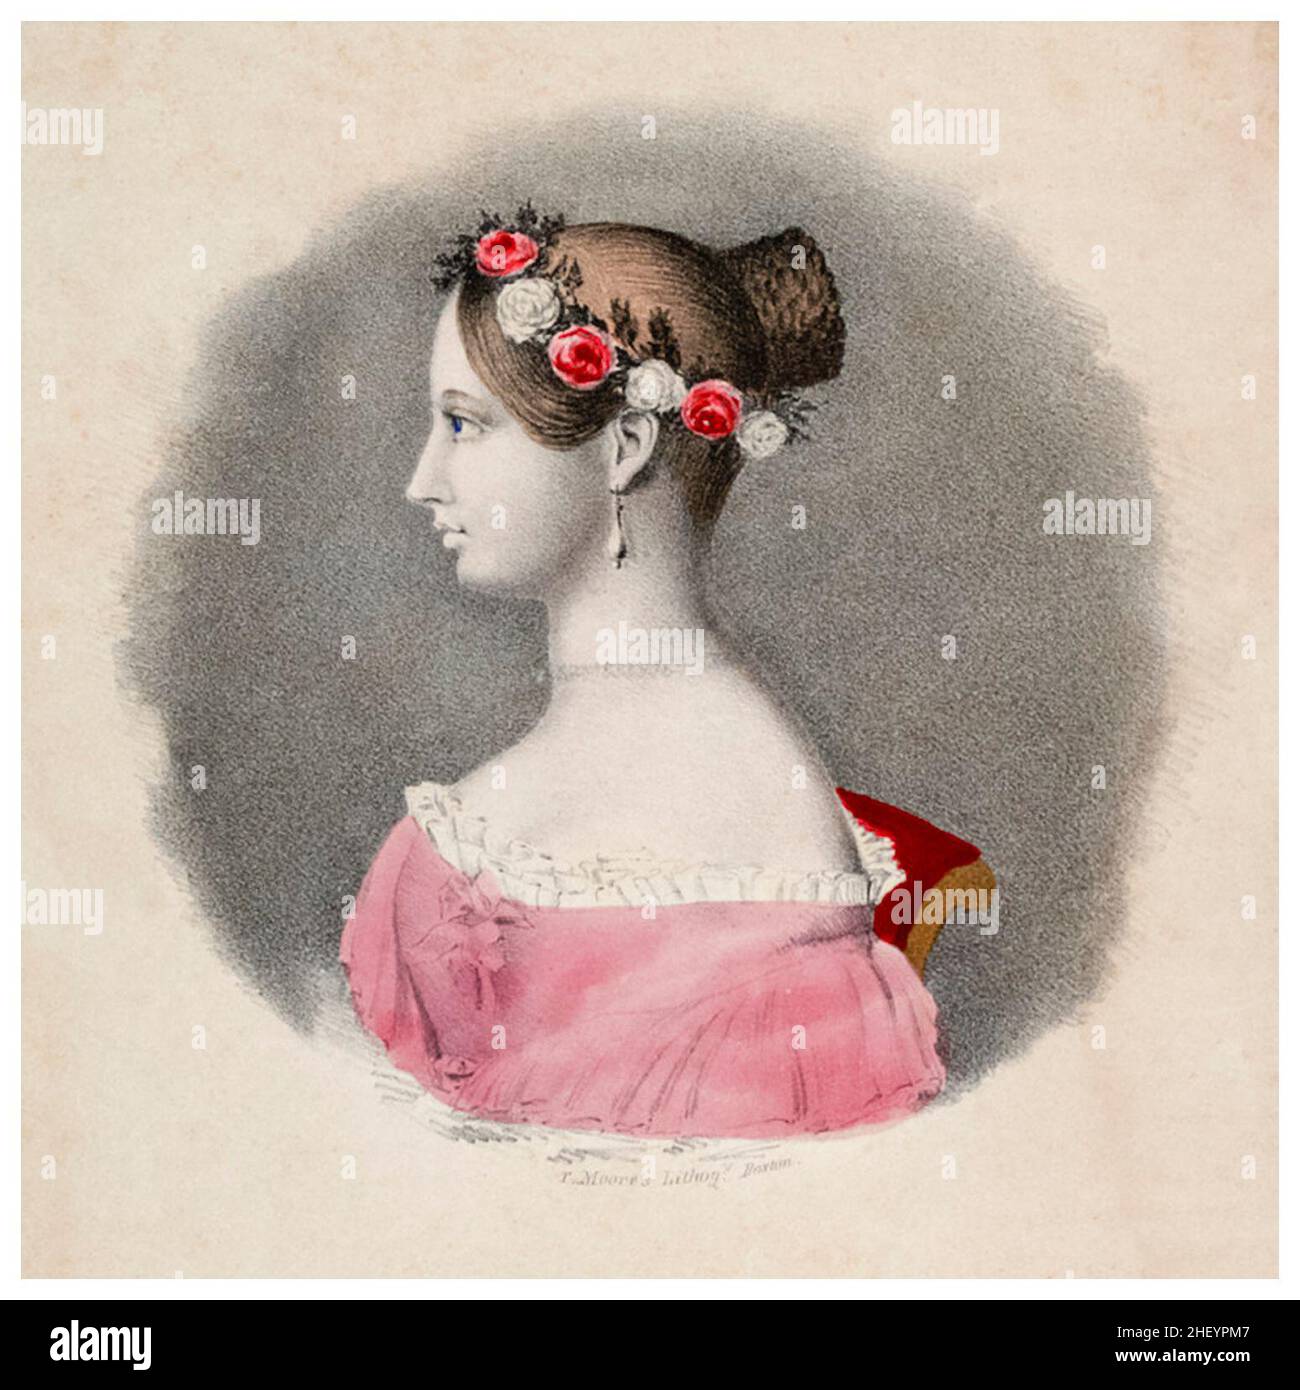 Queen Victoria of Great Britain and the United Kingdom (1819-1901) as a young woman, profile portrait drawing by Thomas Moore, circa 1840 Stock Photo